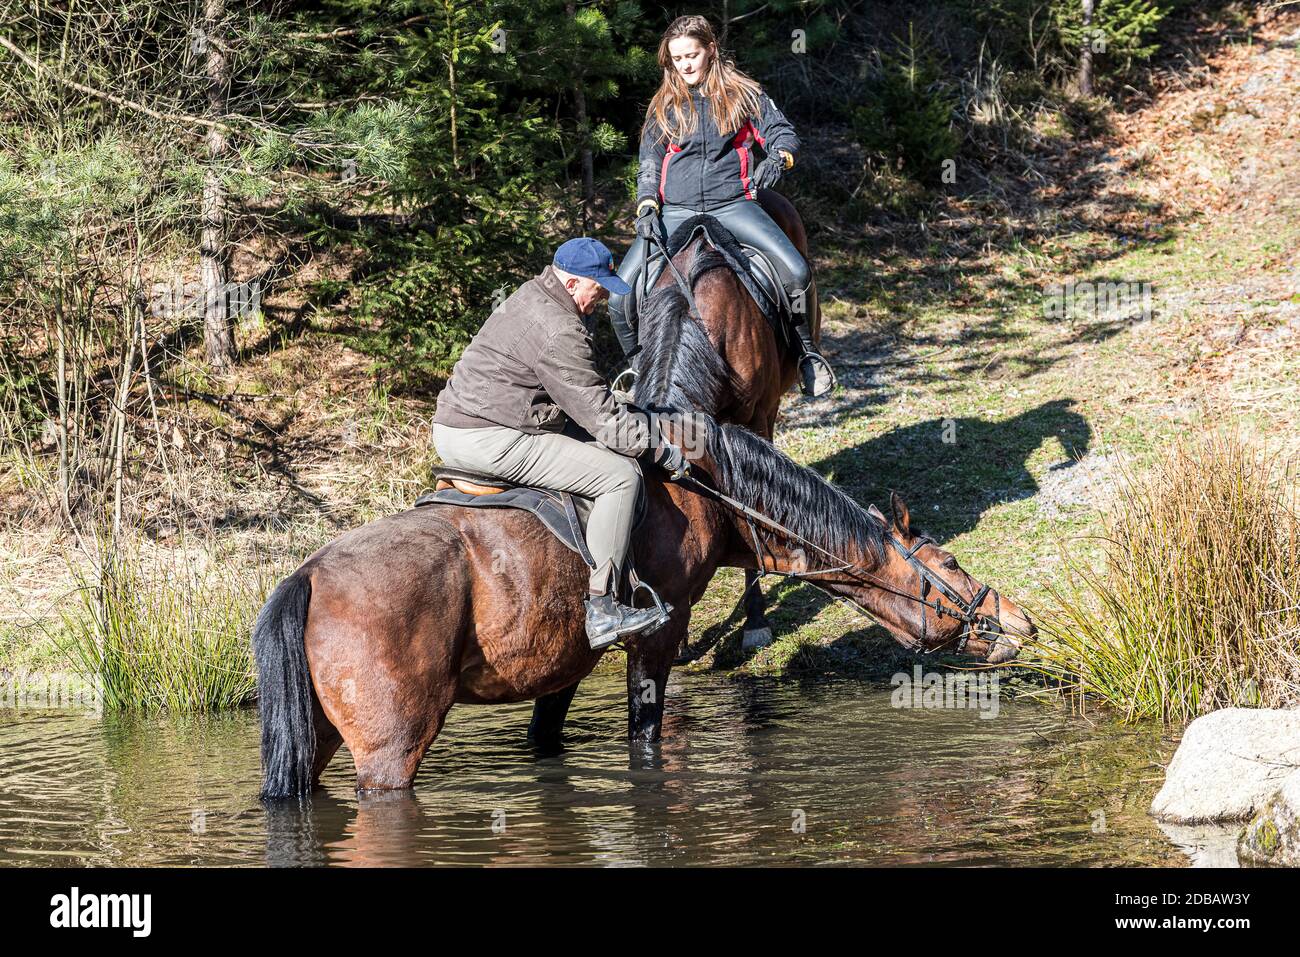 Two rides on horses in a pond Stock Photo